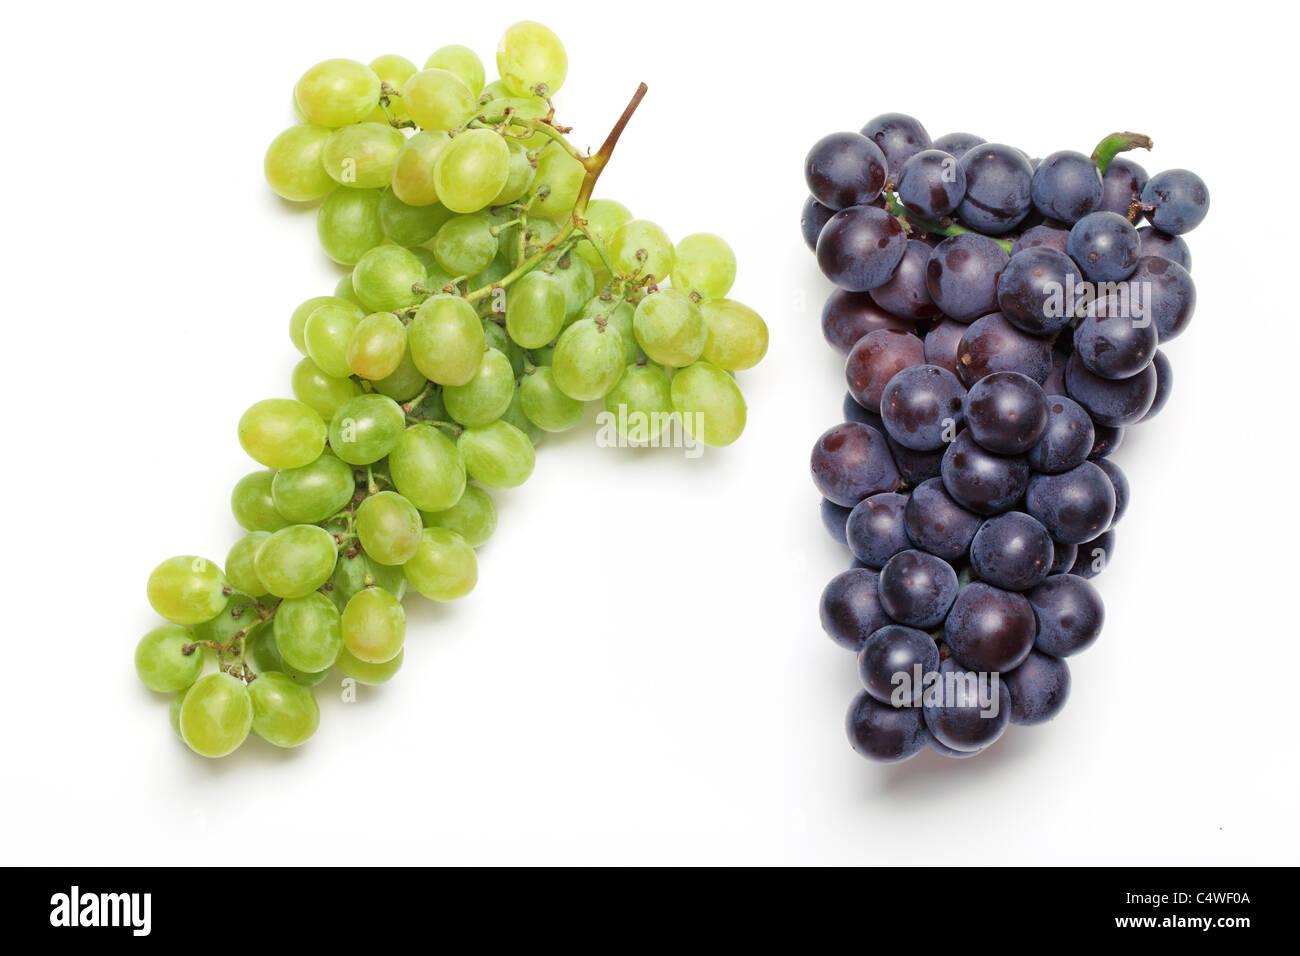 Bunch of grapes isolated on white background. Stock Photo